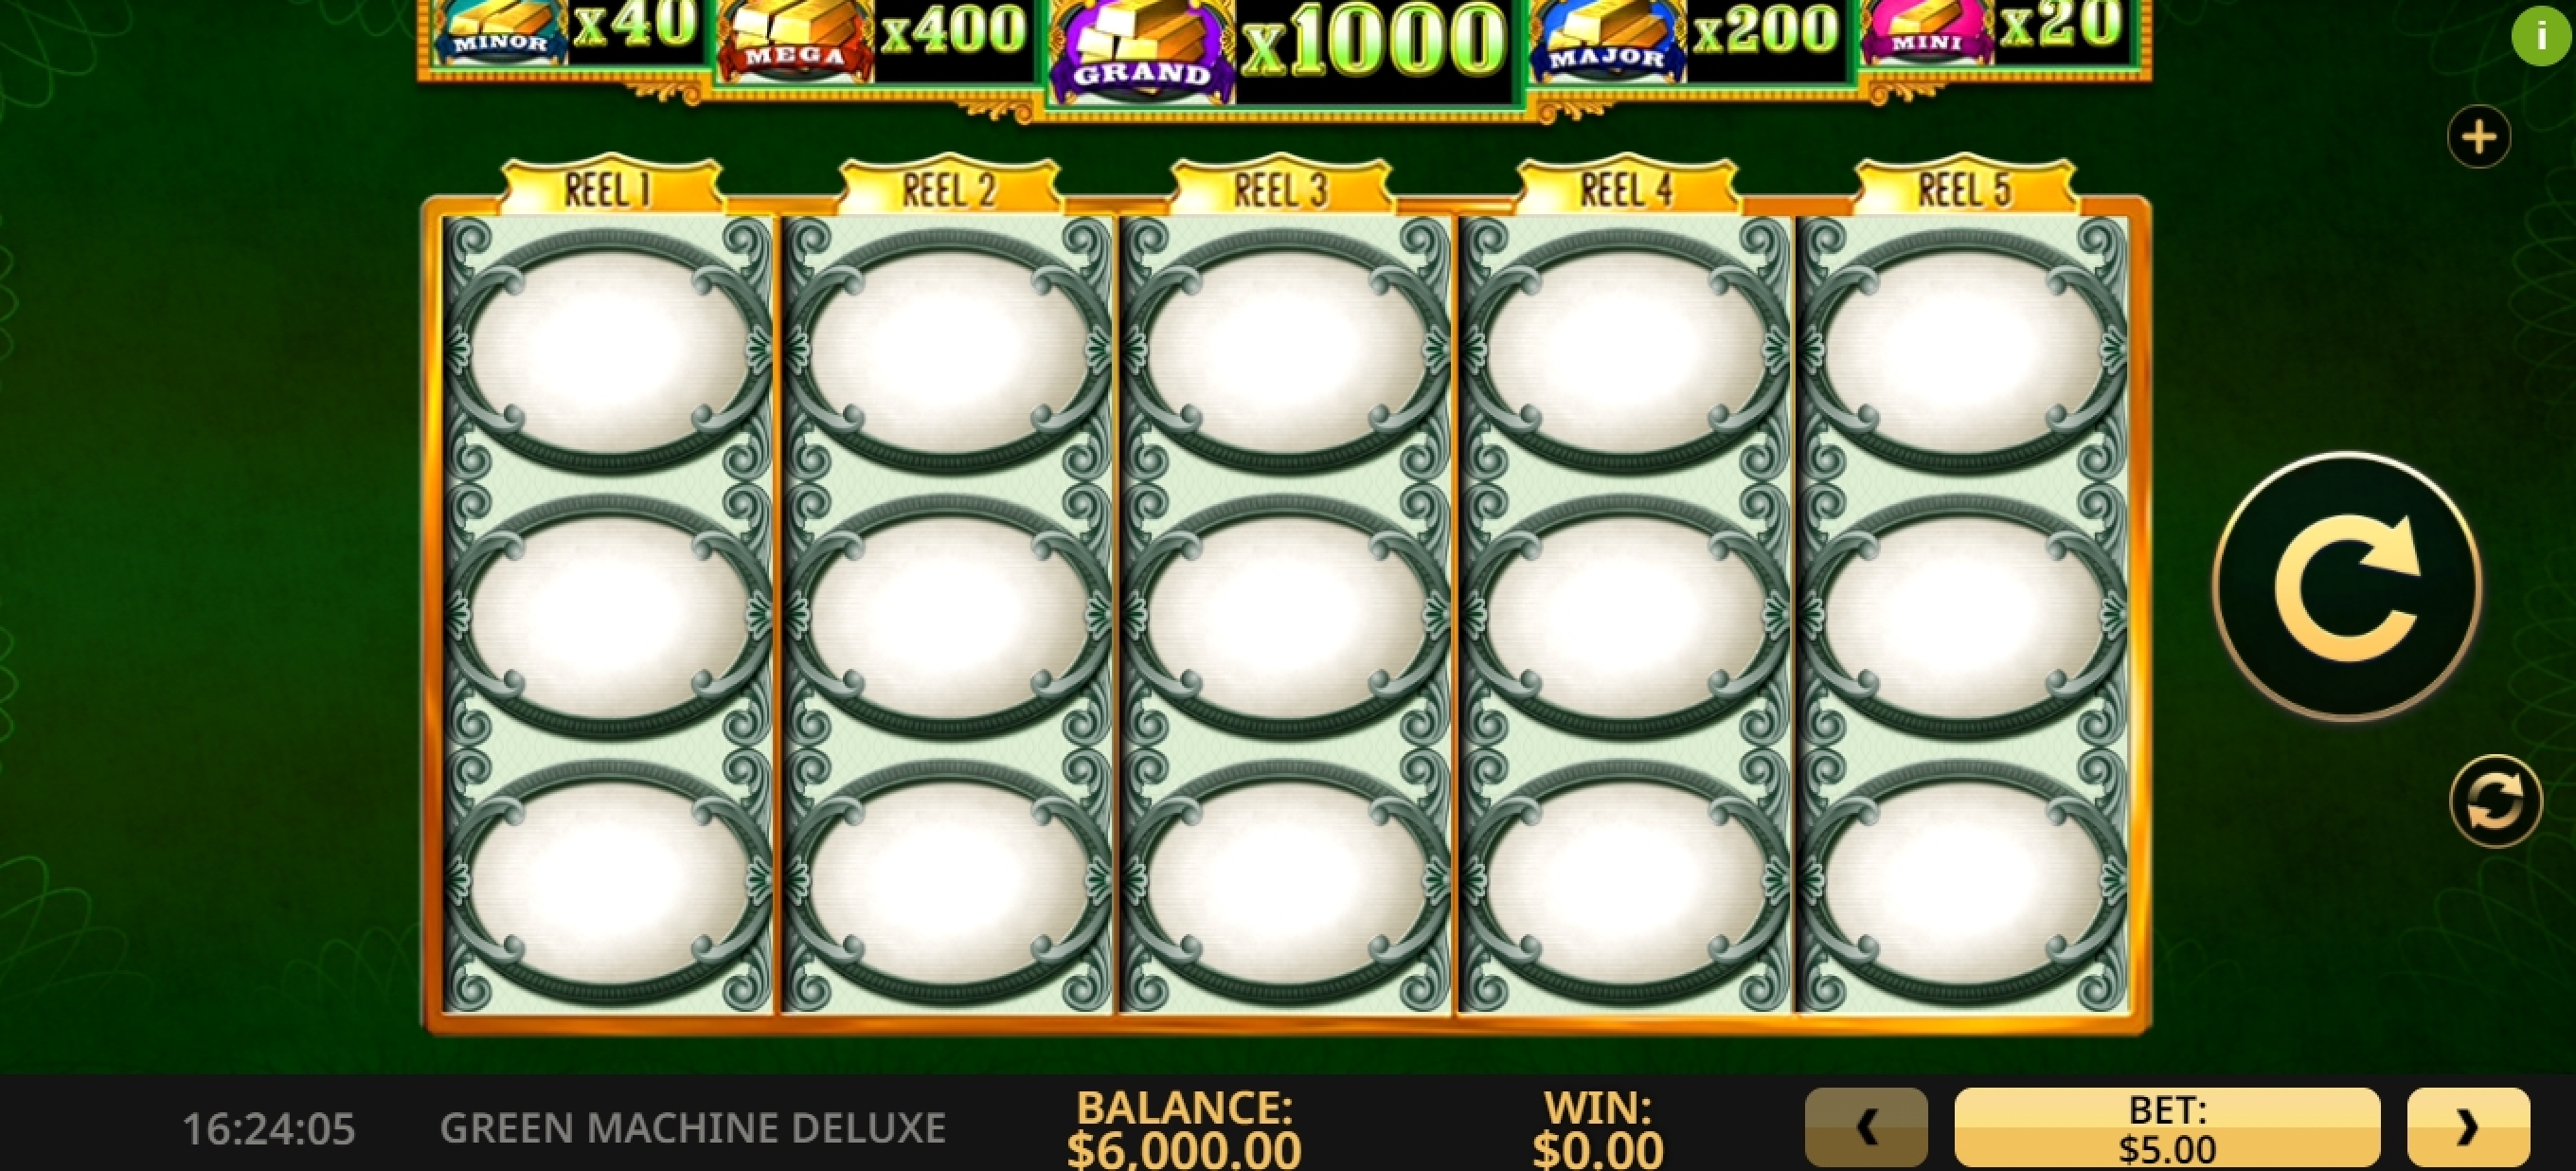 Reels in The Green Machine Deluxe Slot Game by High 5 Games